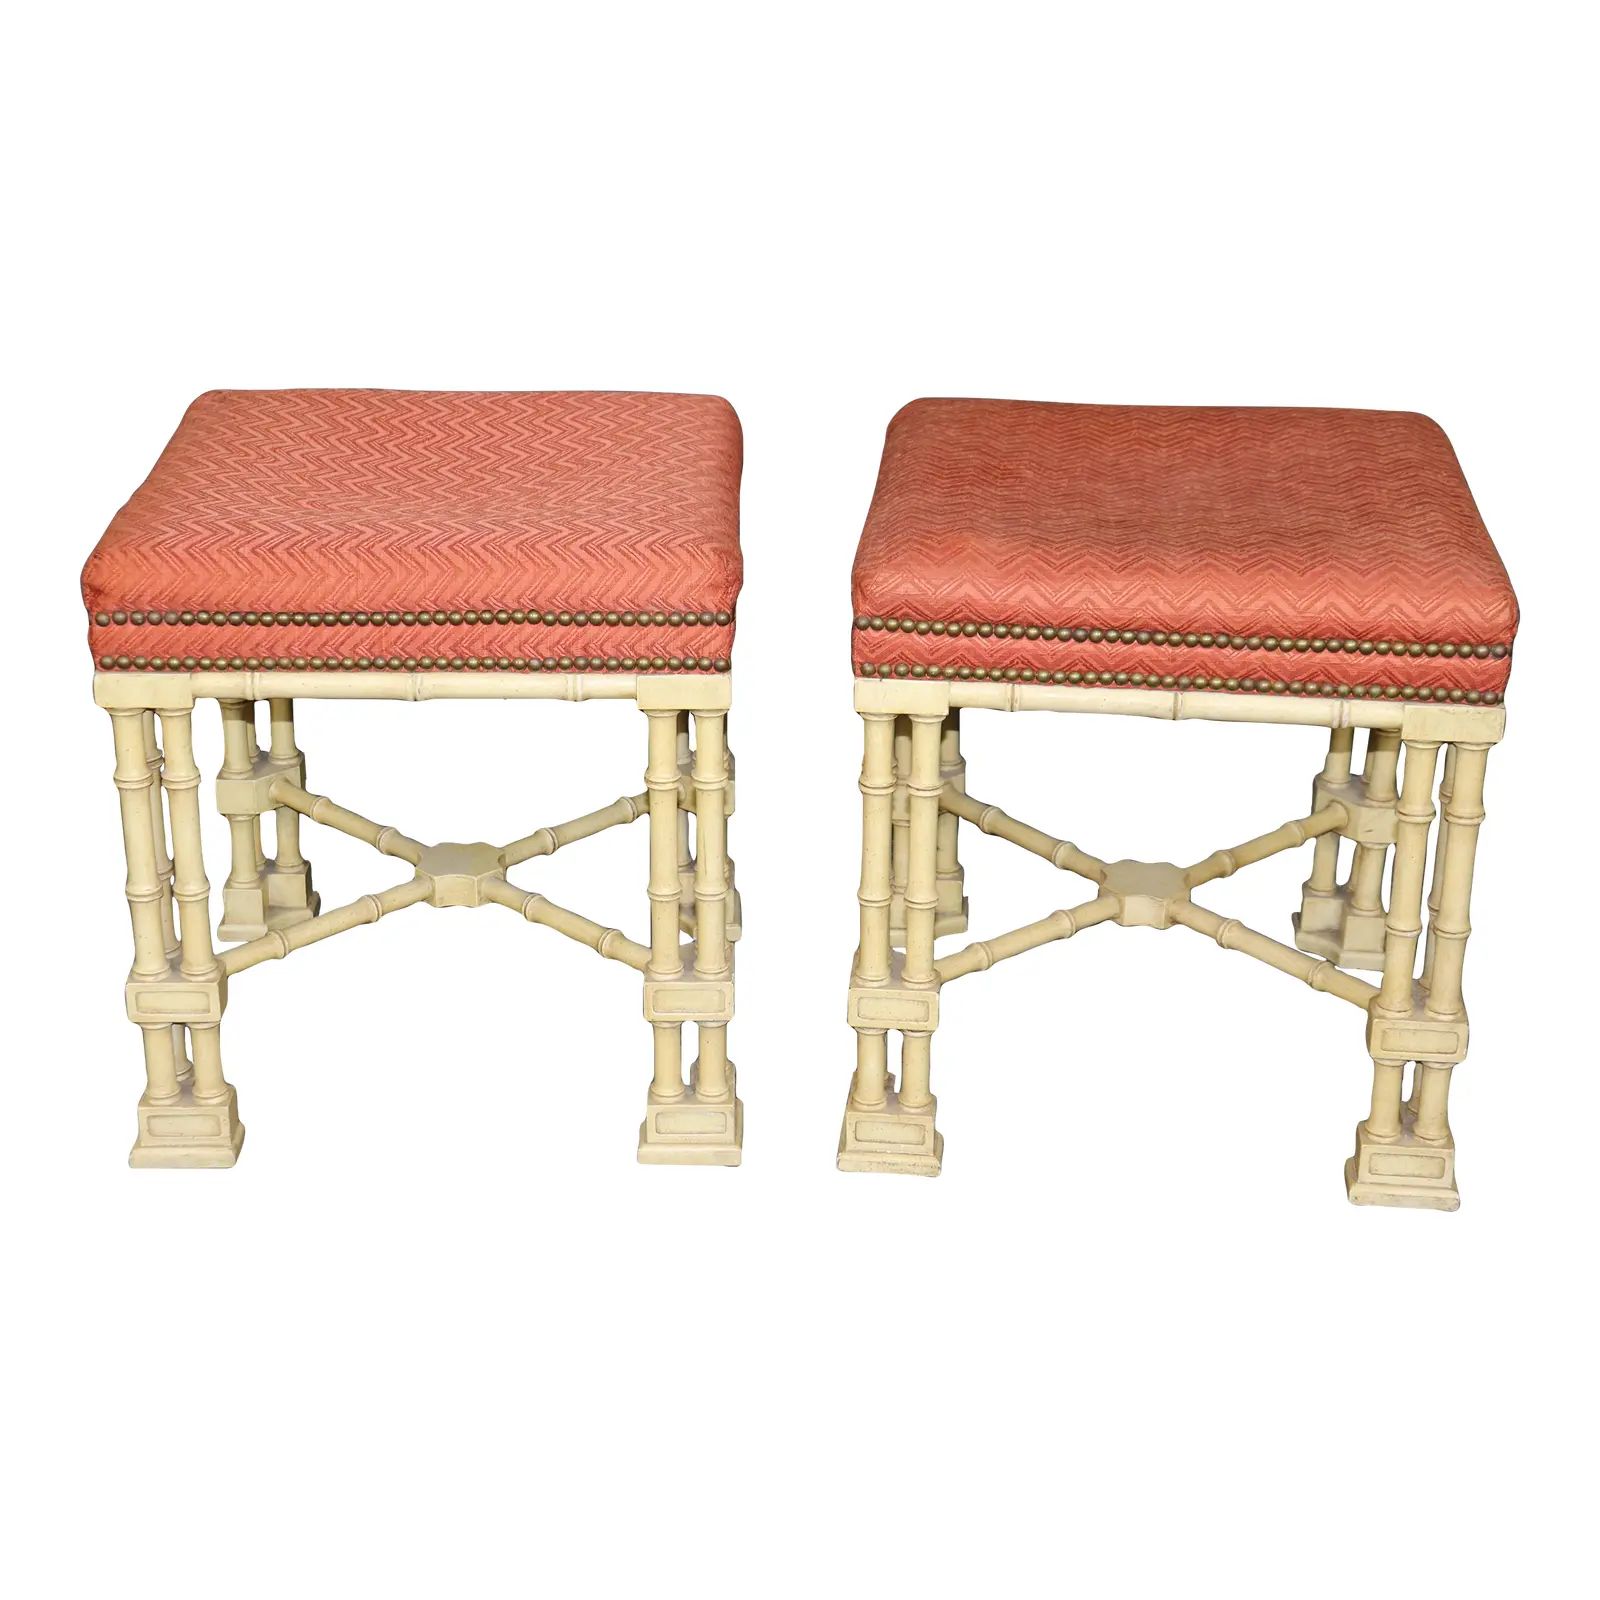 Rare Pair of Chinese Chippendale Creme Painted Faux Bamboo Stools | Chairish